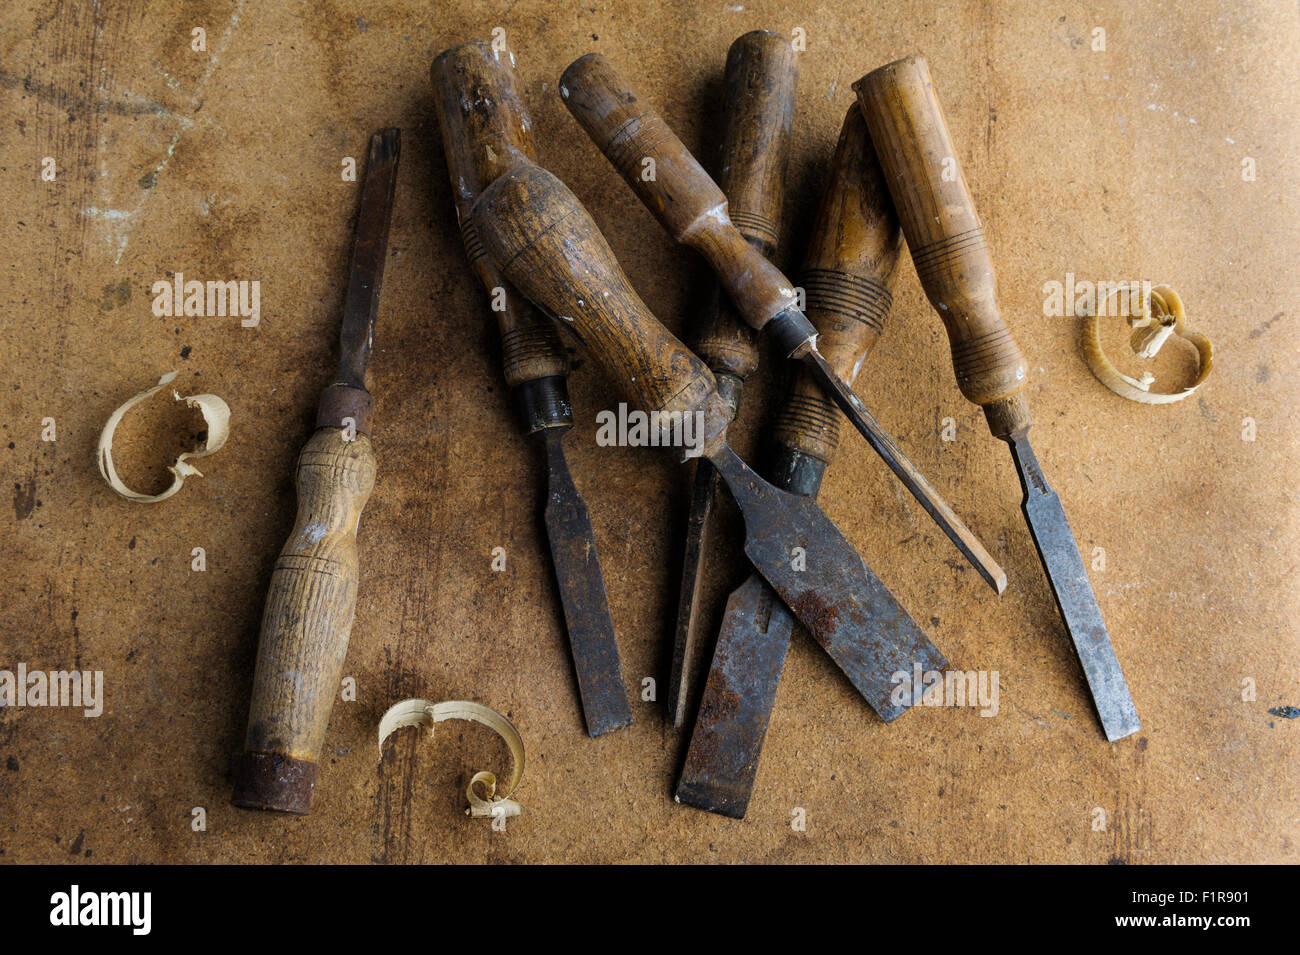 Some very old carpentry chisels Stock Photo